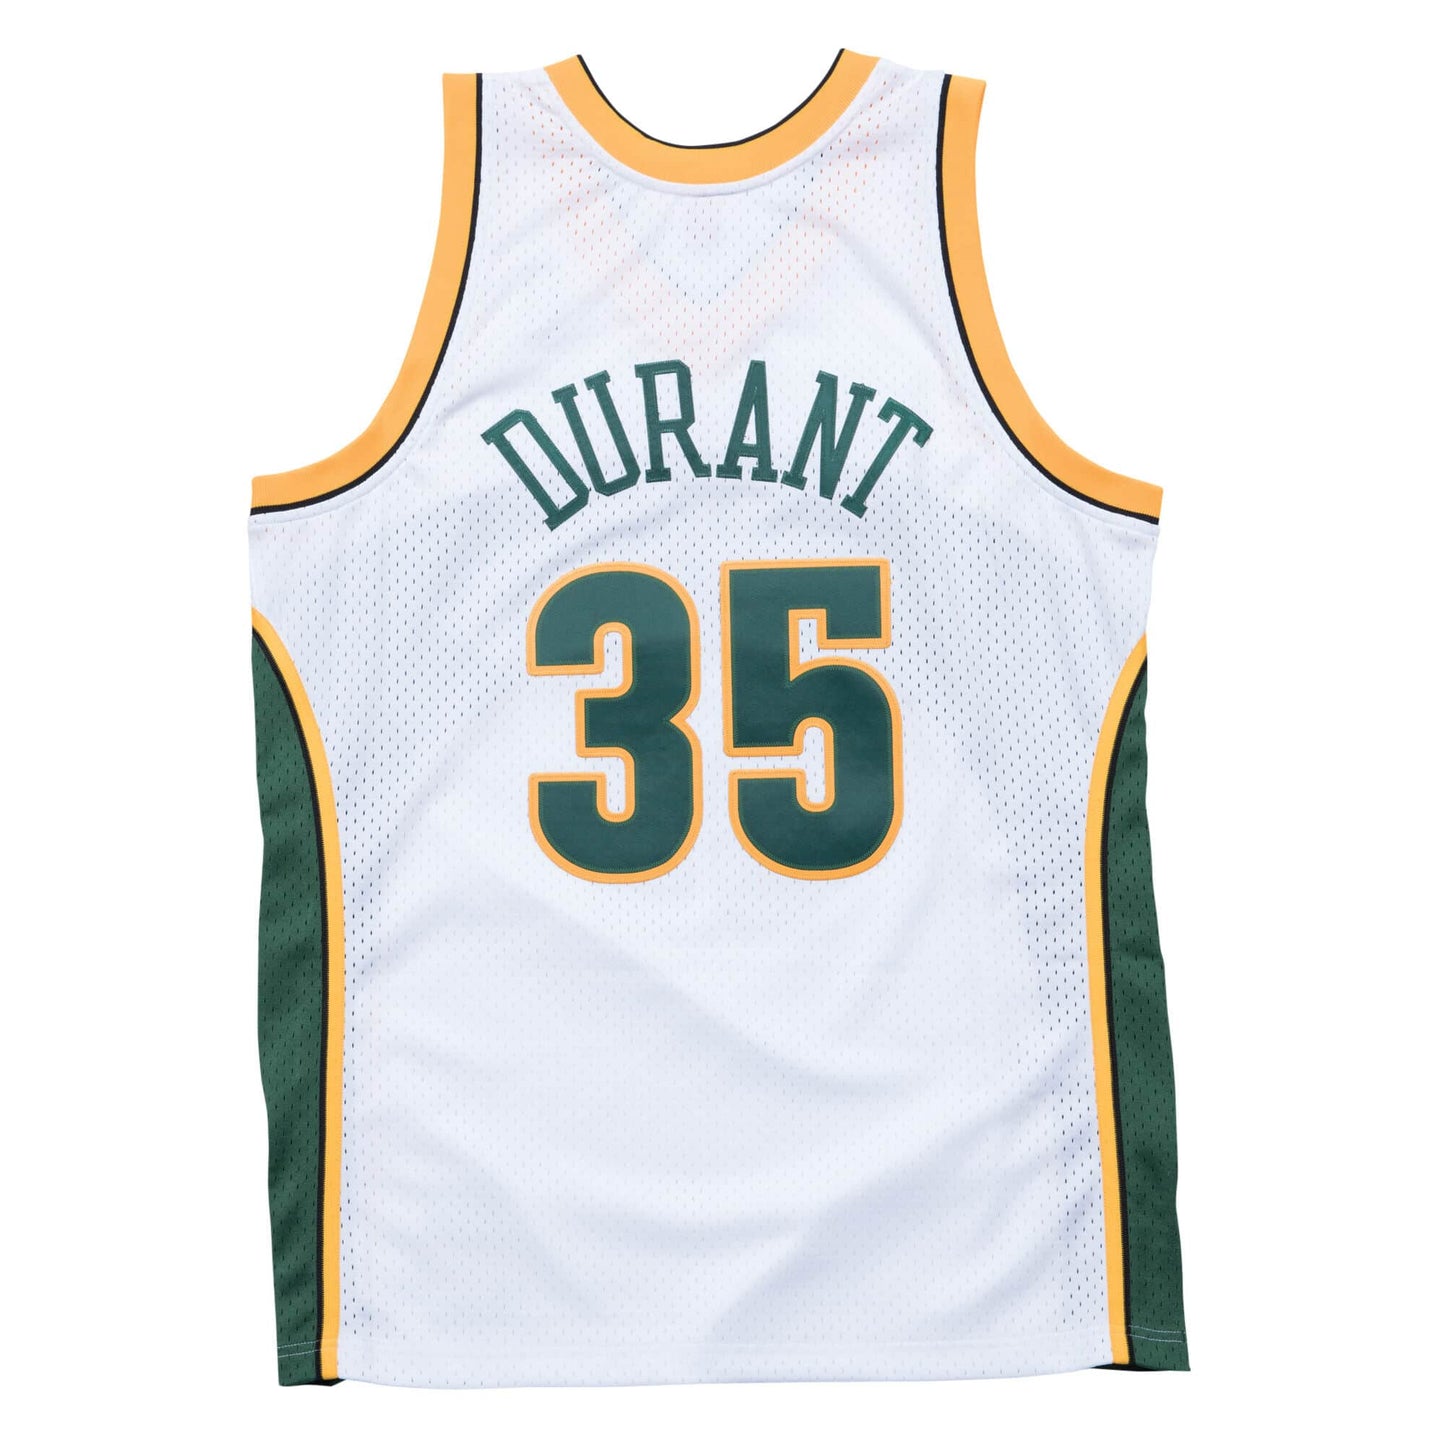 Seattle Supersonics Kevin Durant Mitchell and Ness Jersey - Home (2007-08)